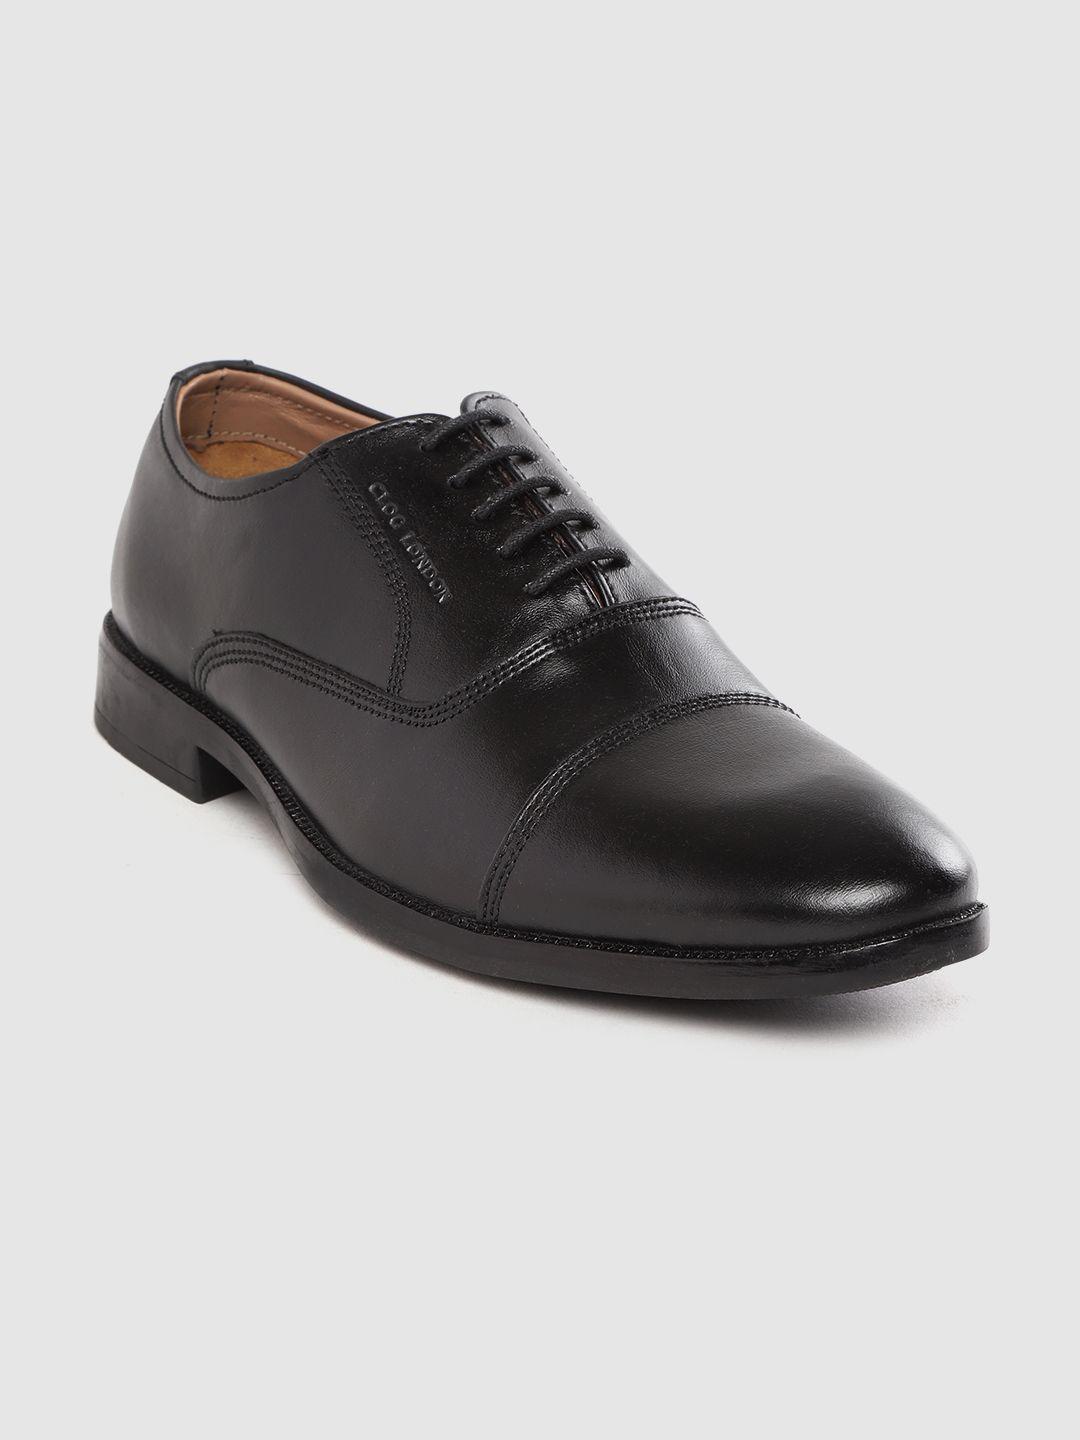 clog london men black solid leather formal oxfords with thread work detail